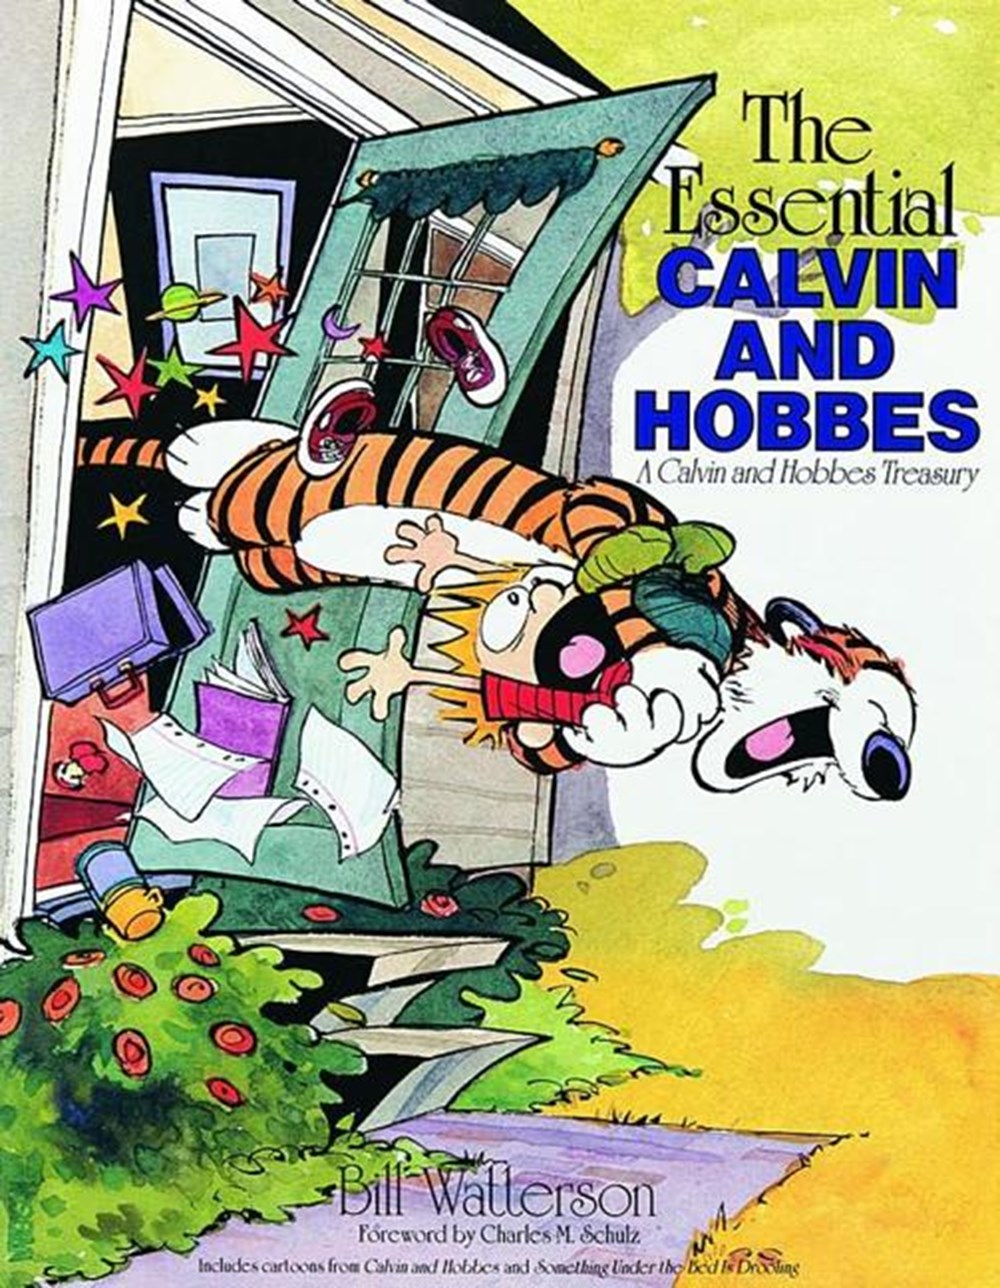 Essential Calvin and Hobbes: A Calvin and Hobbes Treasury